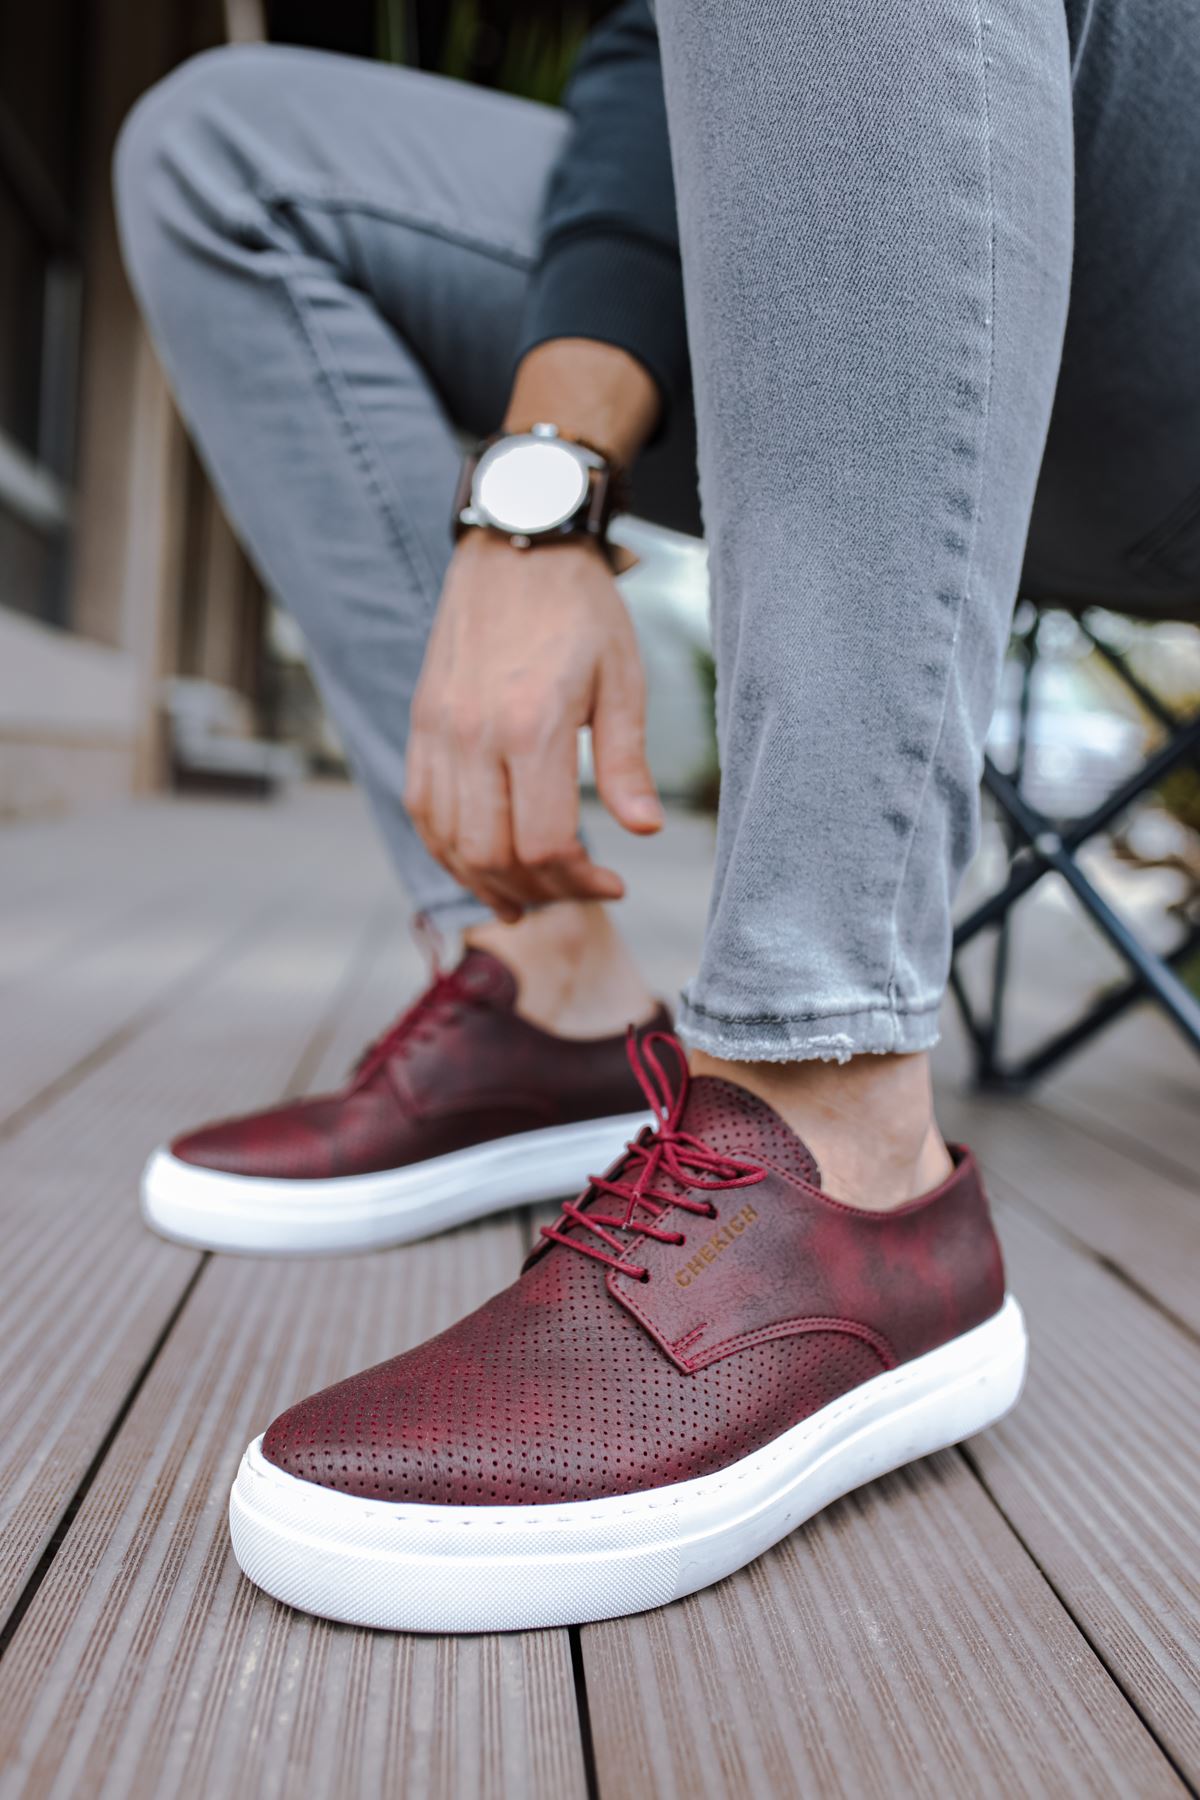 CH061 Men's Orthopedics Burgundy-White Sole Lace-up Casual Sneaker Shoes - STREETMODE ™